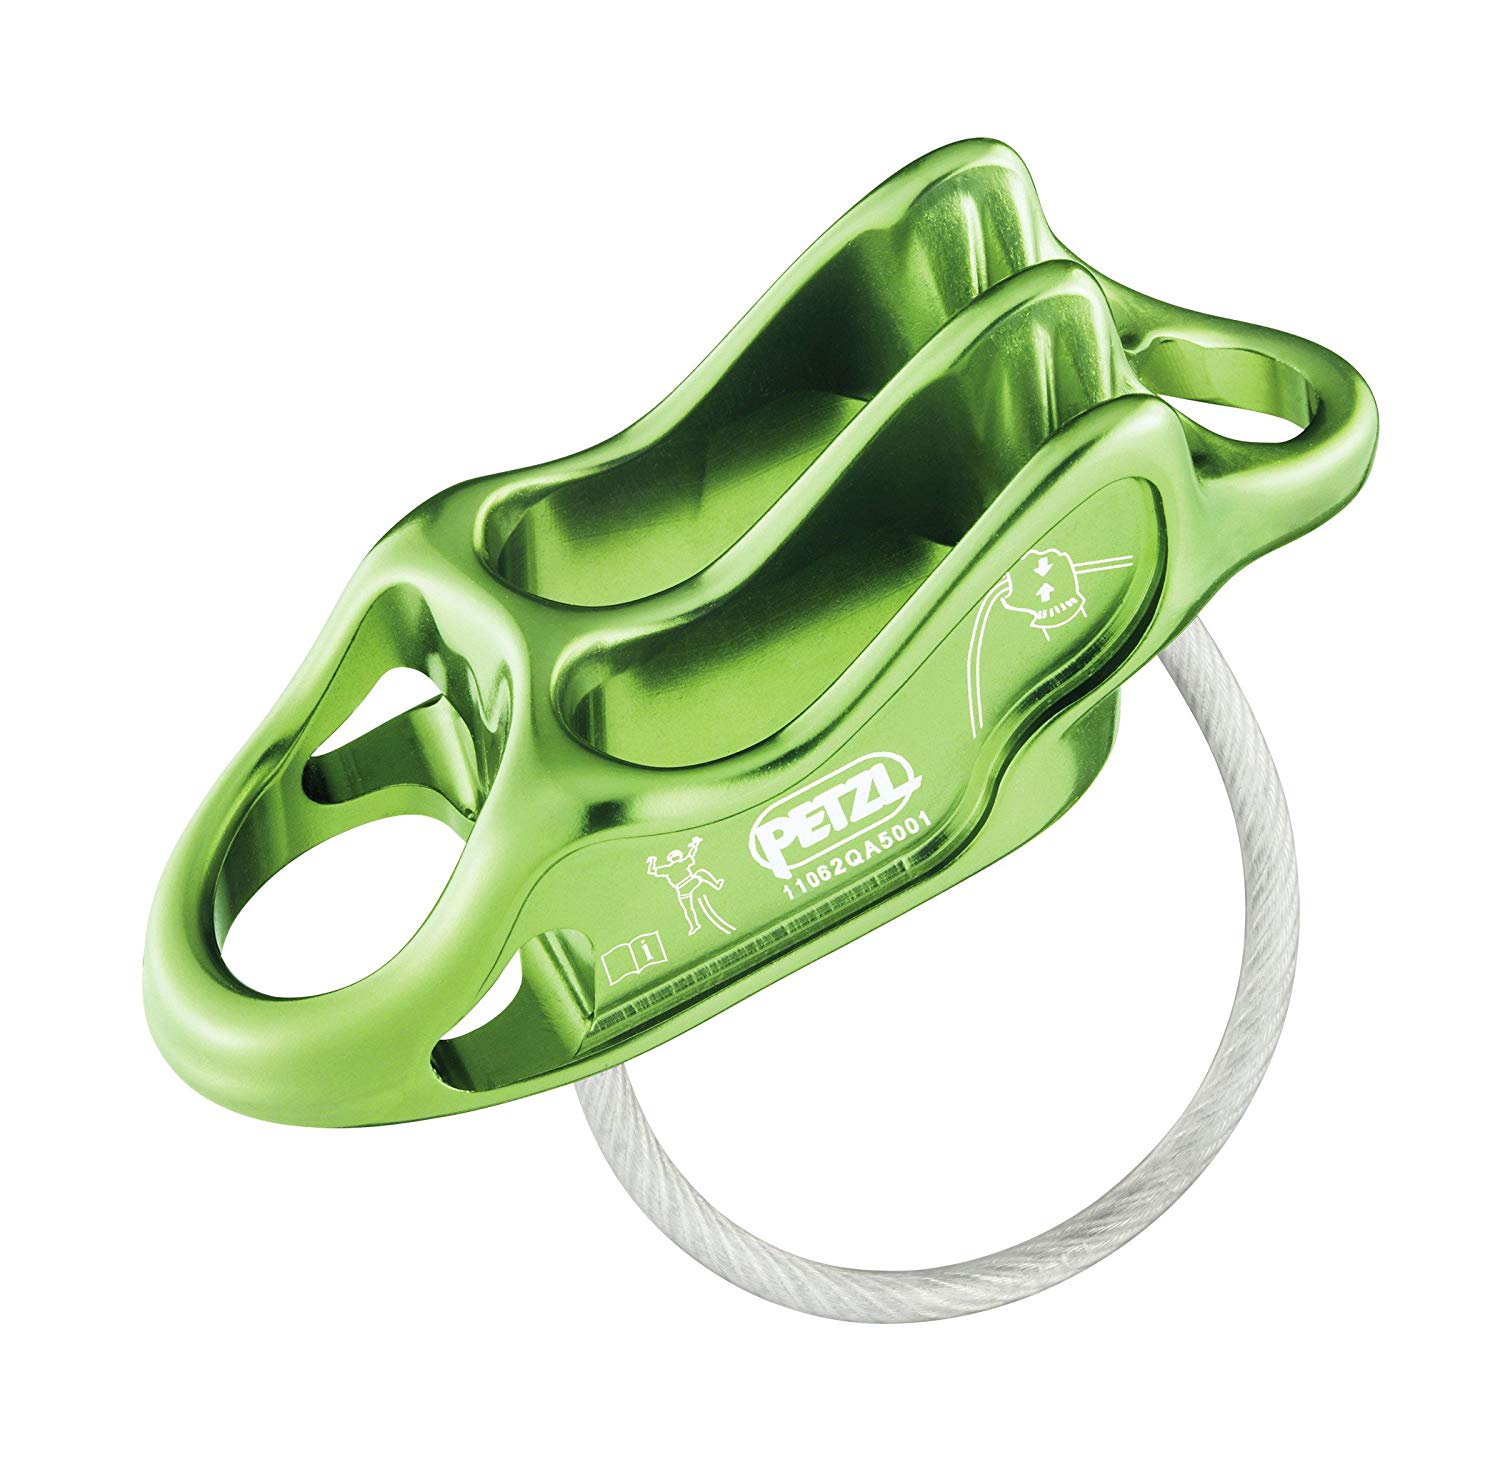 Petzl GriGri Explained: Understanding This Fundamental Belay Device